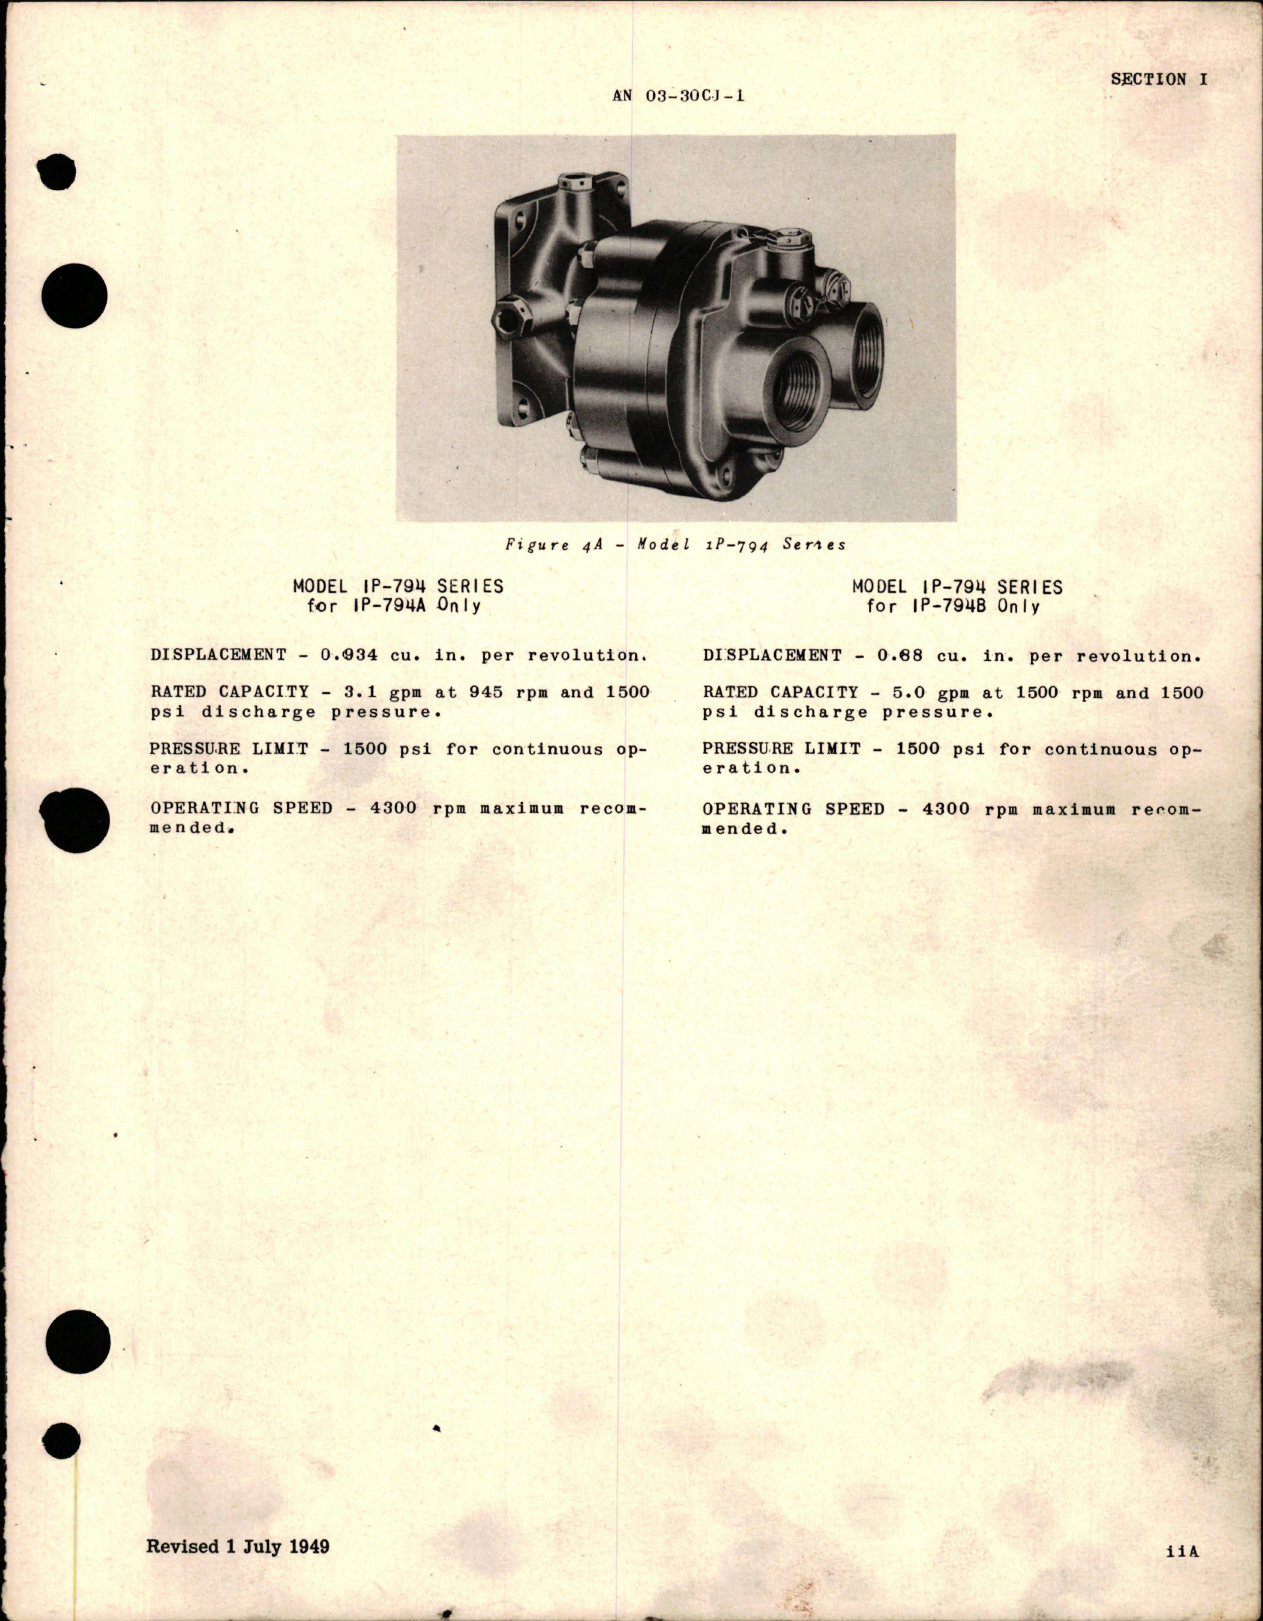 Sample page 5 from AirCorps Library document: Operation, Service and Overhaul Instructions with Parts Catalog for Gear Type Hydraulic Pumps 